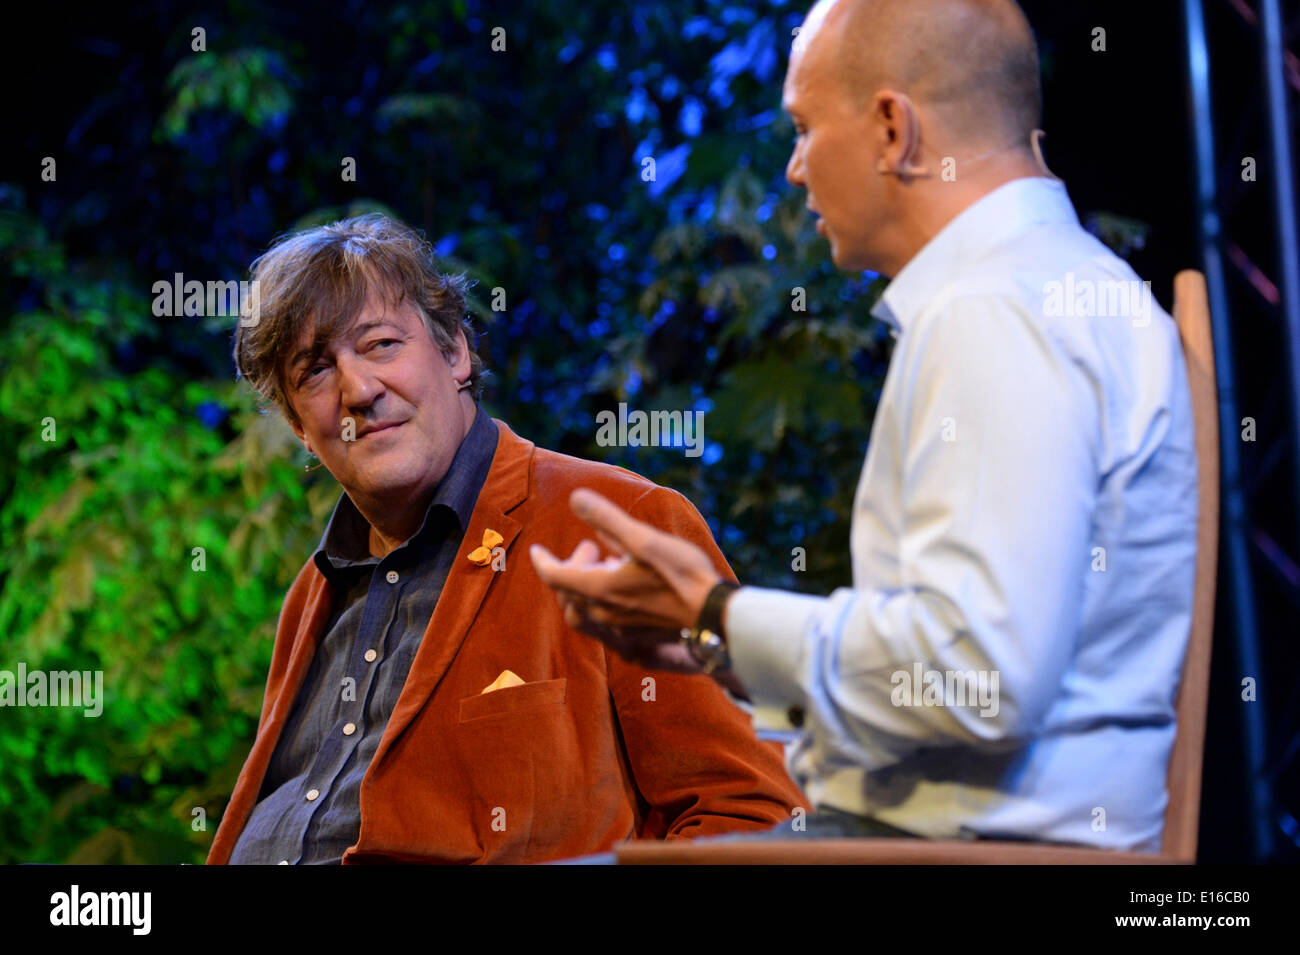 Hay on Wye, Wales UK, Saturday 24 May 2014 STEPHEN FRY in conversation with TONY FADELL, the inventor of te iPod, on stage on the third day of the 2014 Daily Telegraph Hay Literature Festival, Wales UK Credit:  keith morris/Alamy Live News Stock Photo